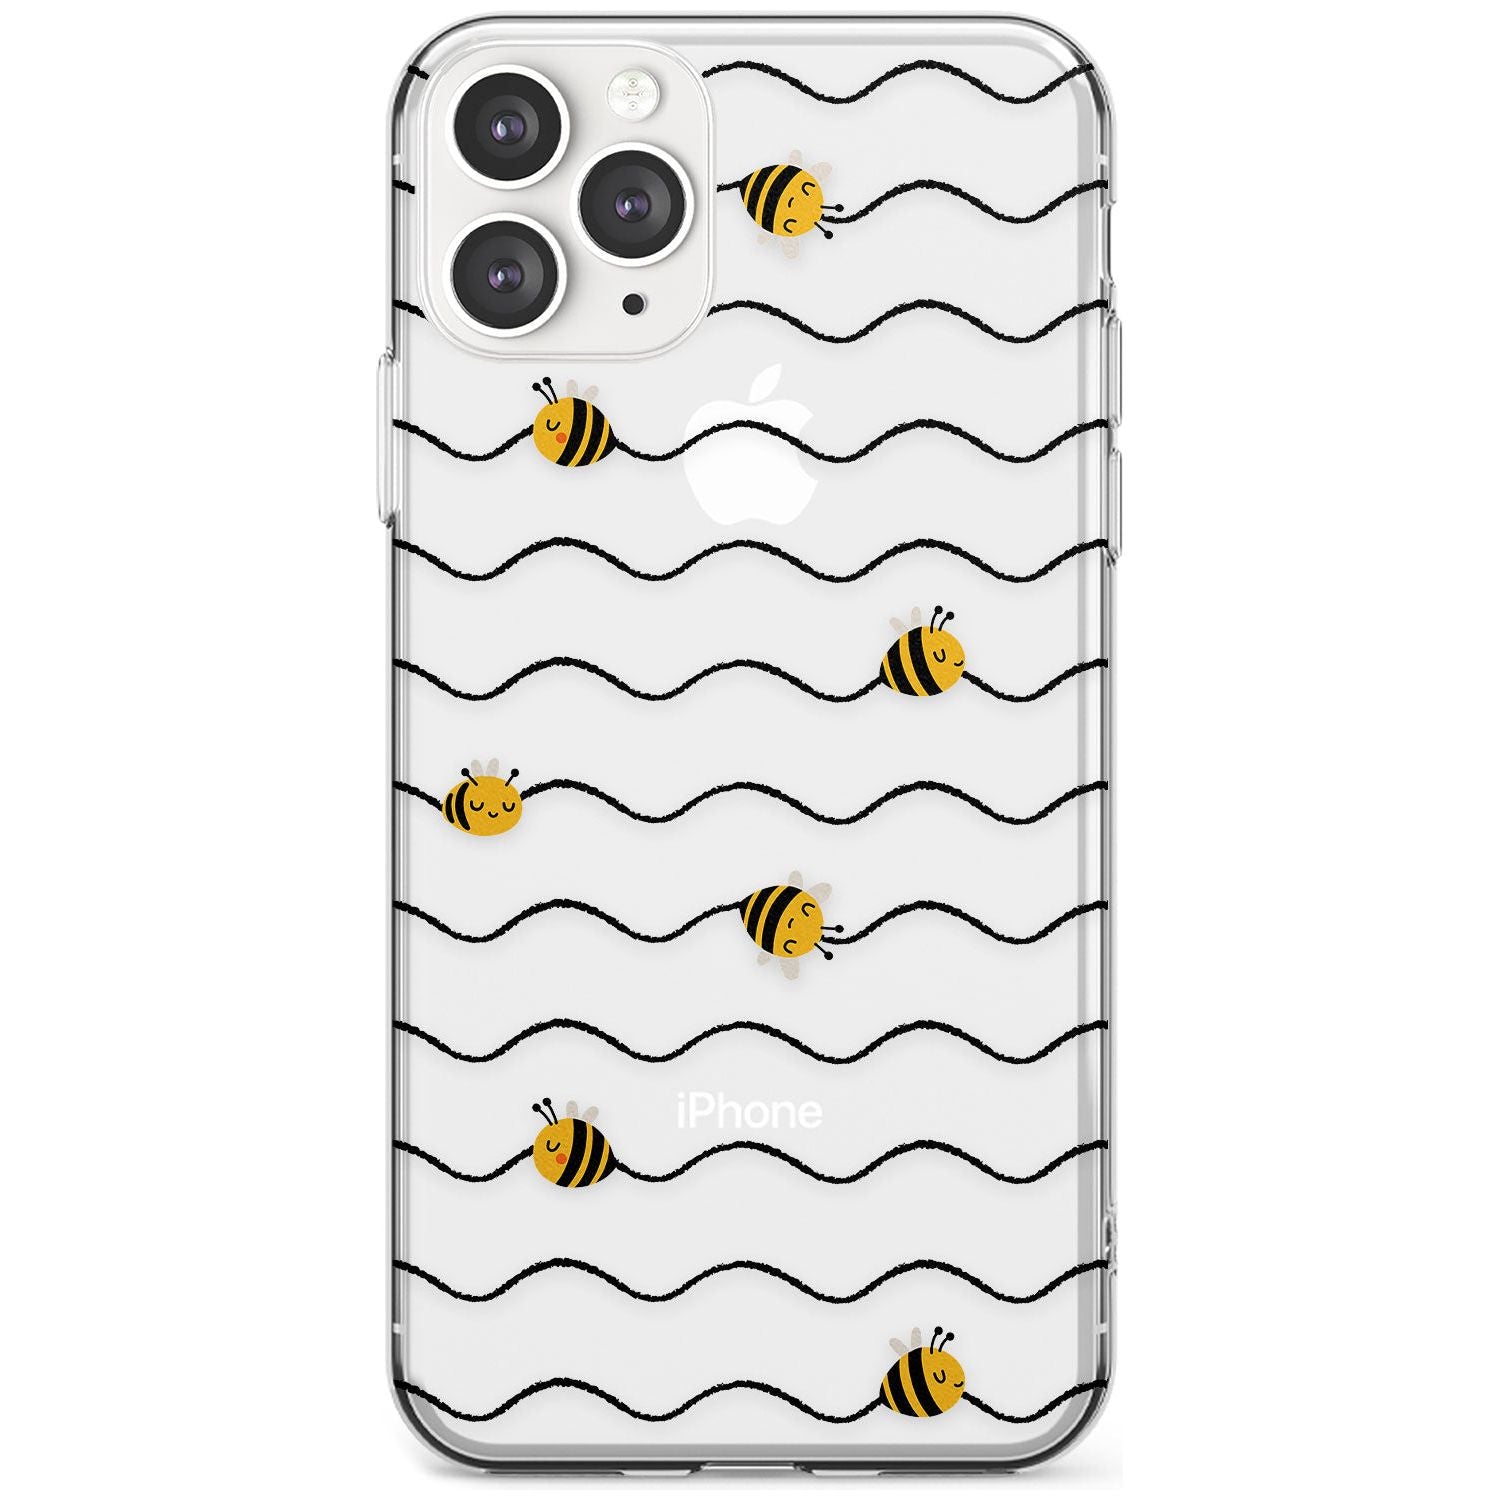 Sweet as Honey Patterns: Bees & Stripes (Clear) Slim TPU Phone Case for iPhone 11 Pro Max